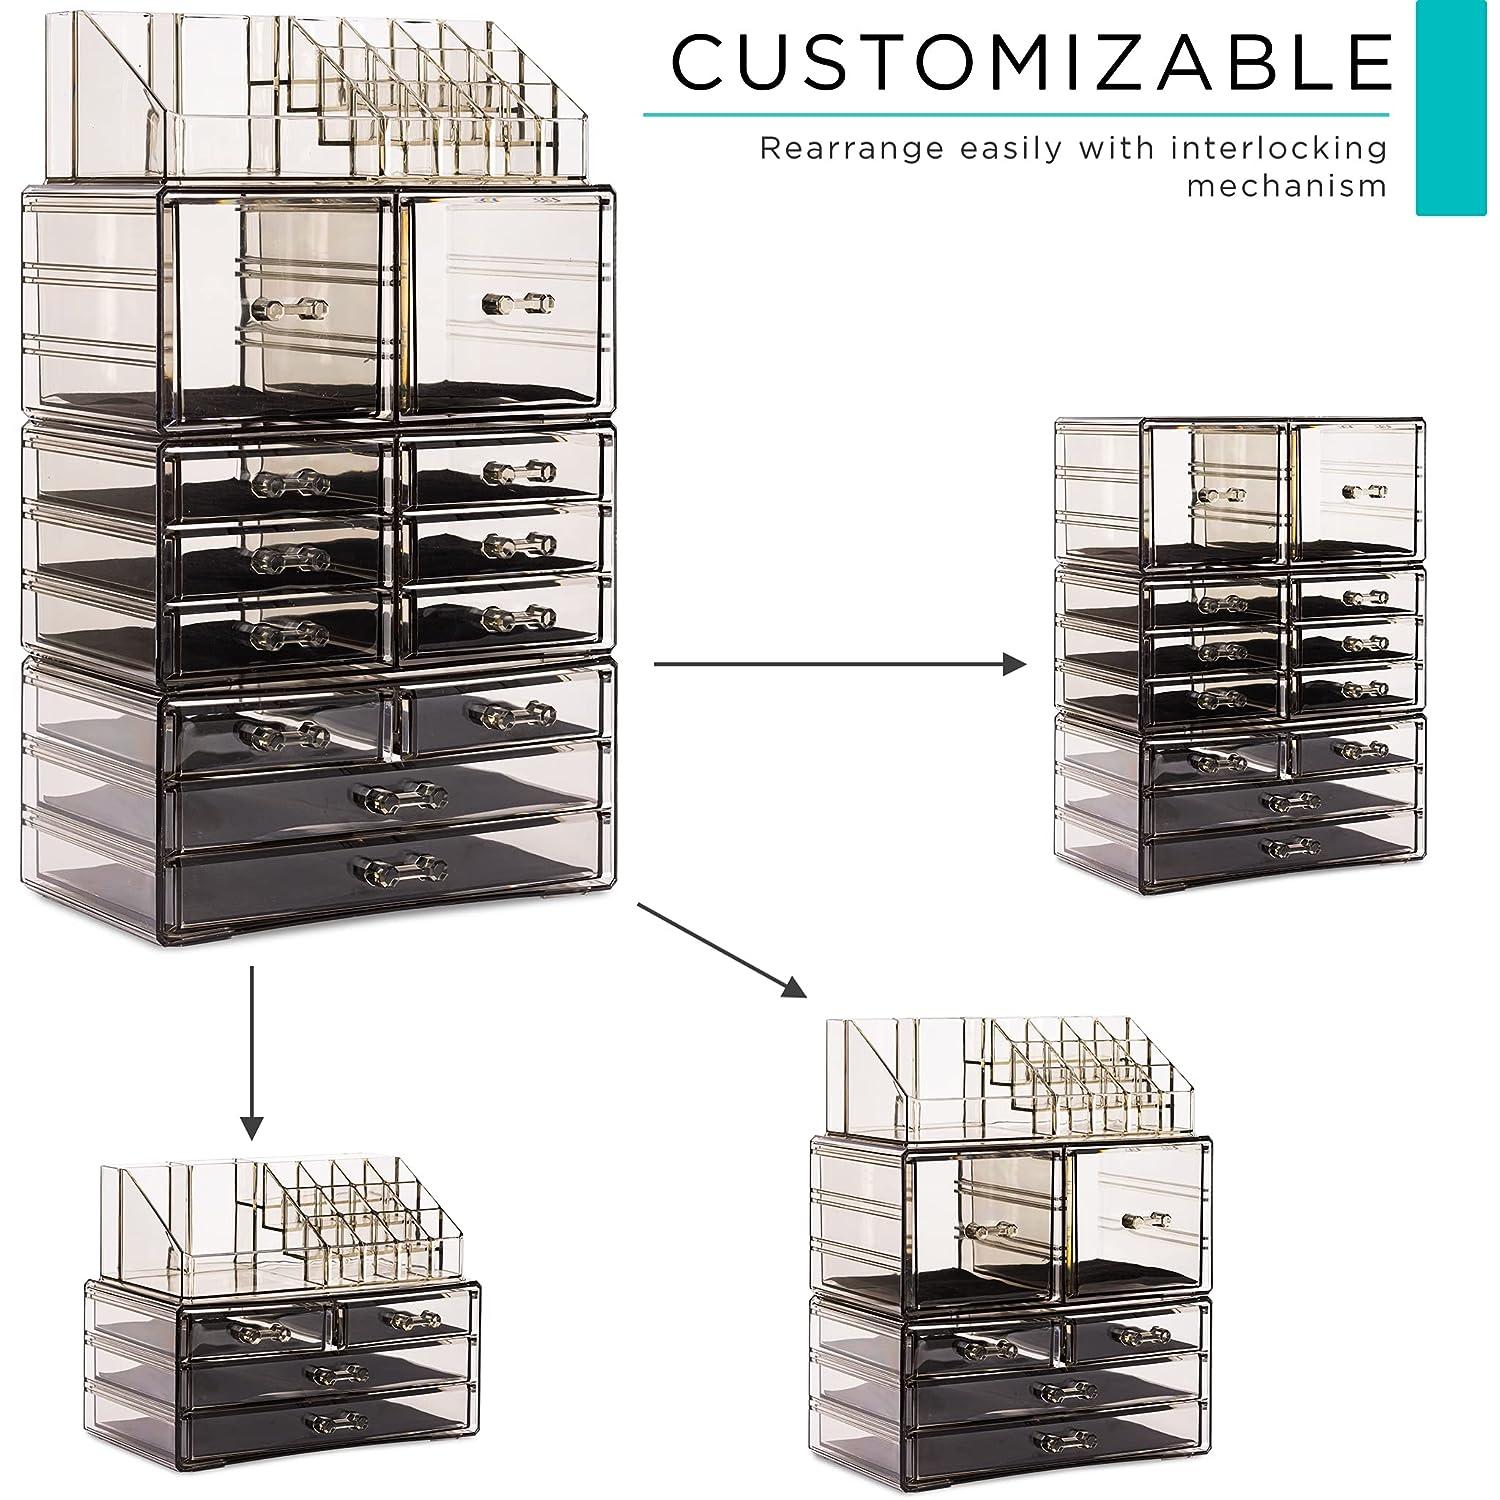 Sorbus Cosmetic Makeup and Jewelry Storage Case Tower Display Organizer - Spacious de